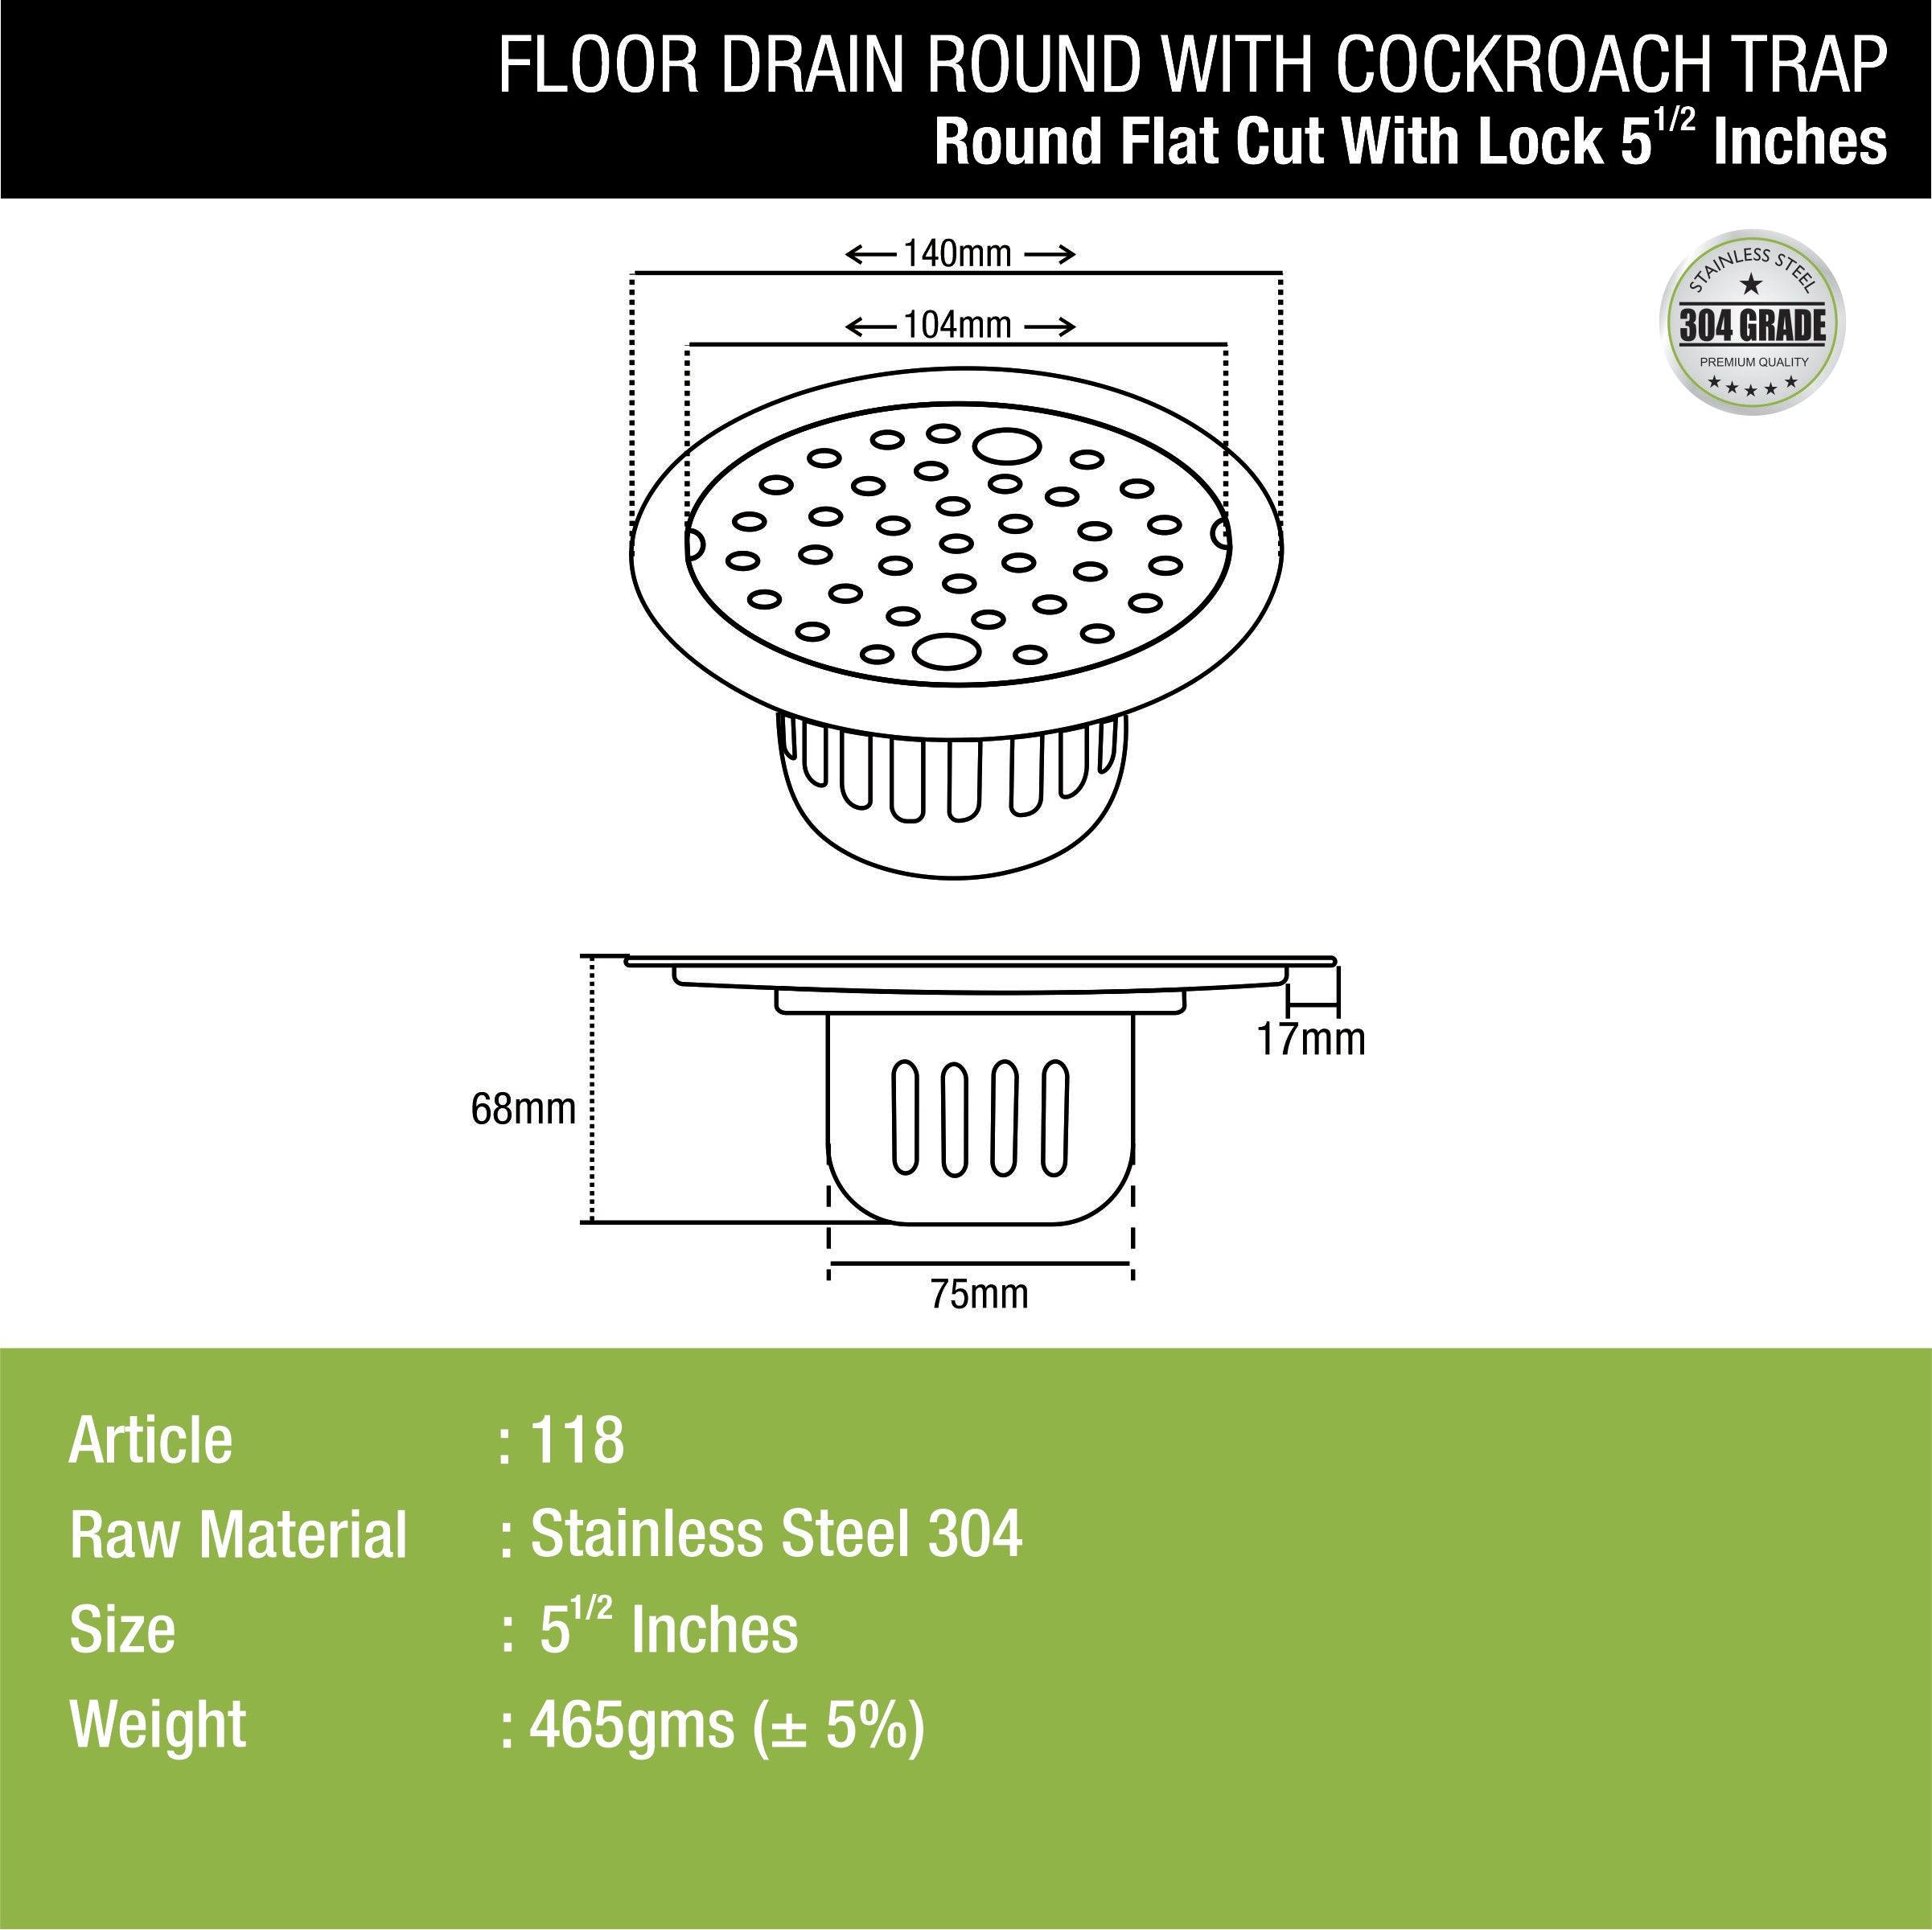 Round Flat Cut Floor Drain (5.5 inches) with Lock & Cockroach Trap dimensions and sizes